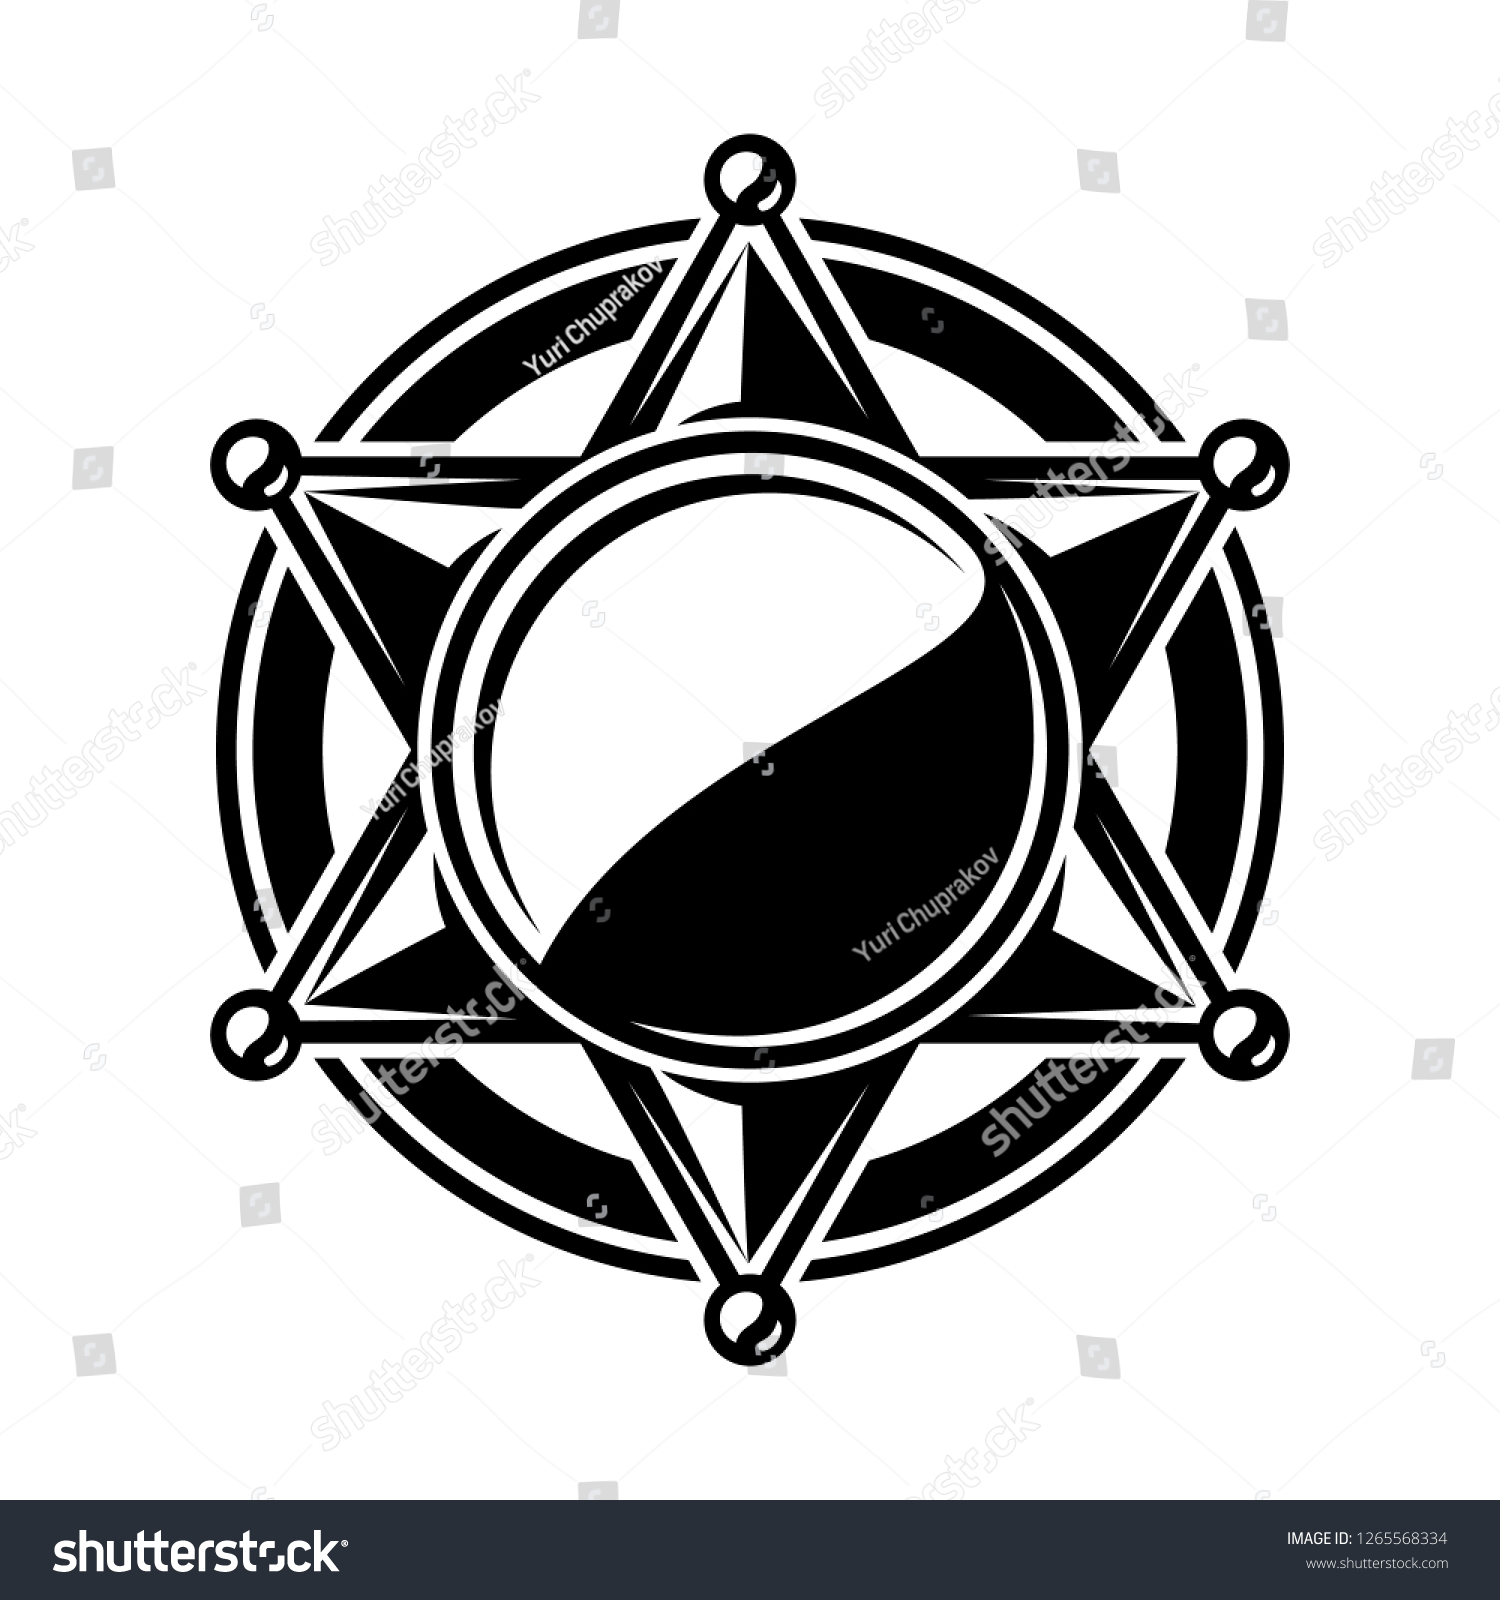 SVG of Monochrome flat icon, sheriff star, cowboy badge. Simple shape for graphic design of logo, emblem, symbol, sign, label, stamp, isolated on white background. svg